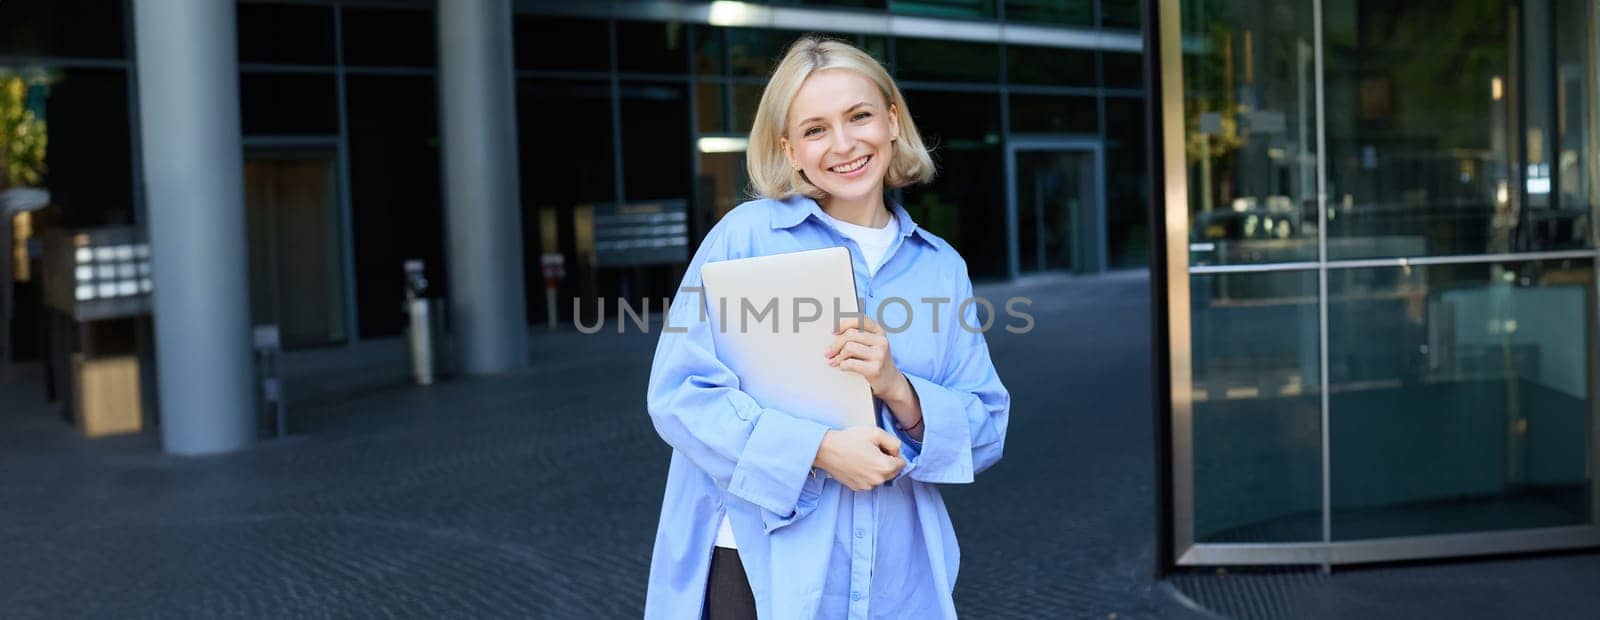 Image of young female employee, working woman standing near her office on street, holding pile of documents and smiling. People and lifestyle concept